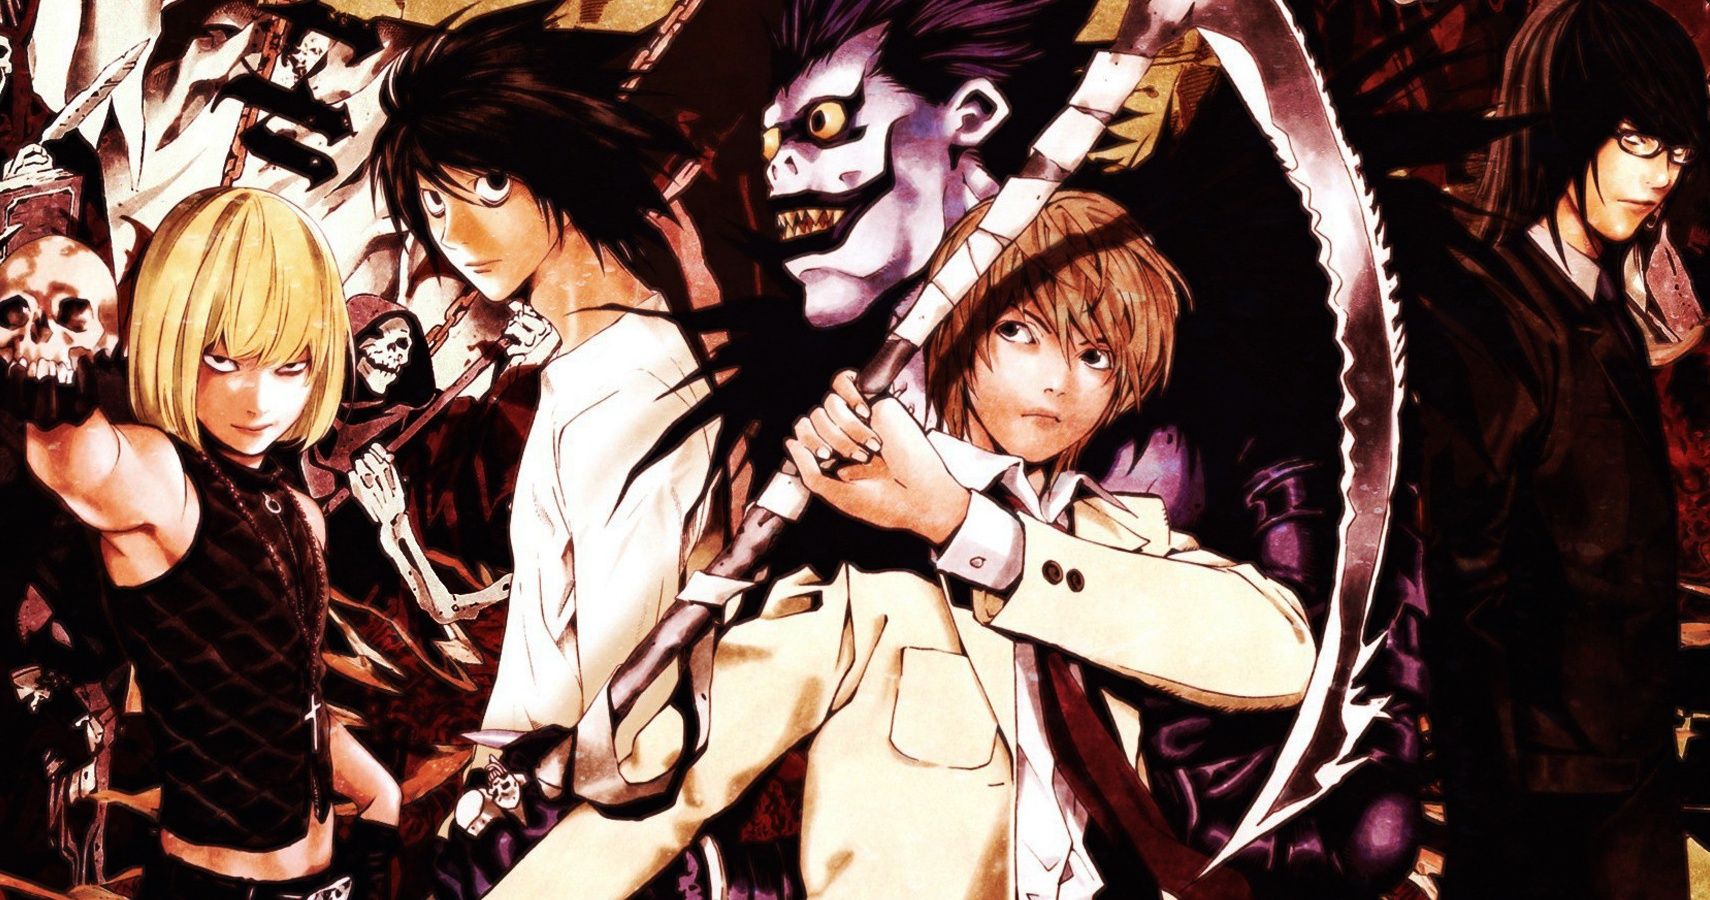 Near, L and Ryuk standing behind Light Yagami wielding a scythe.